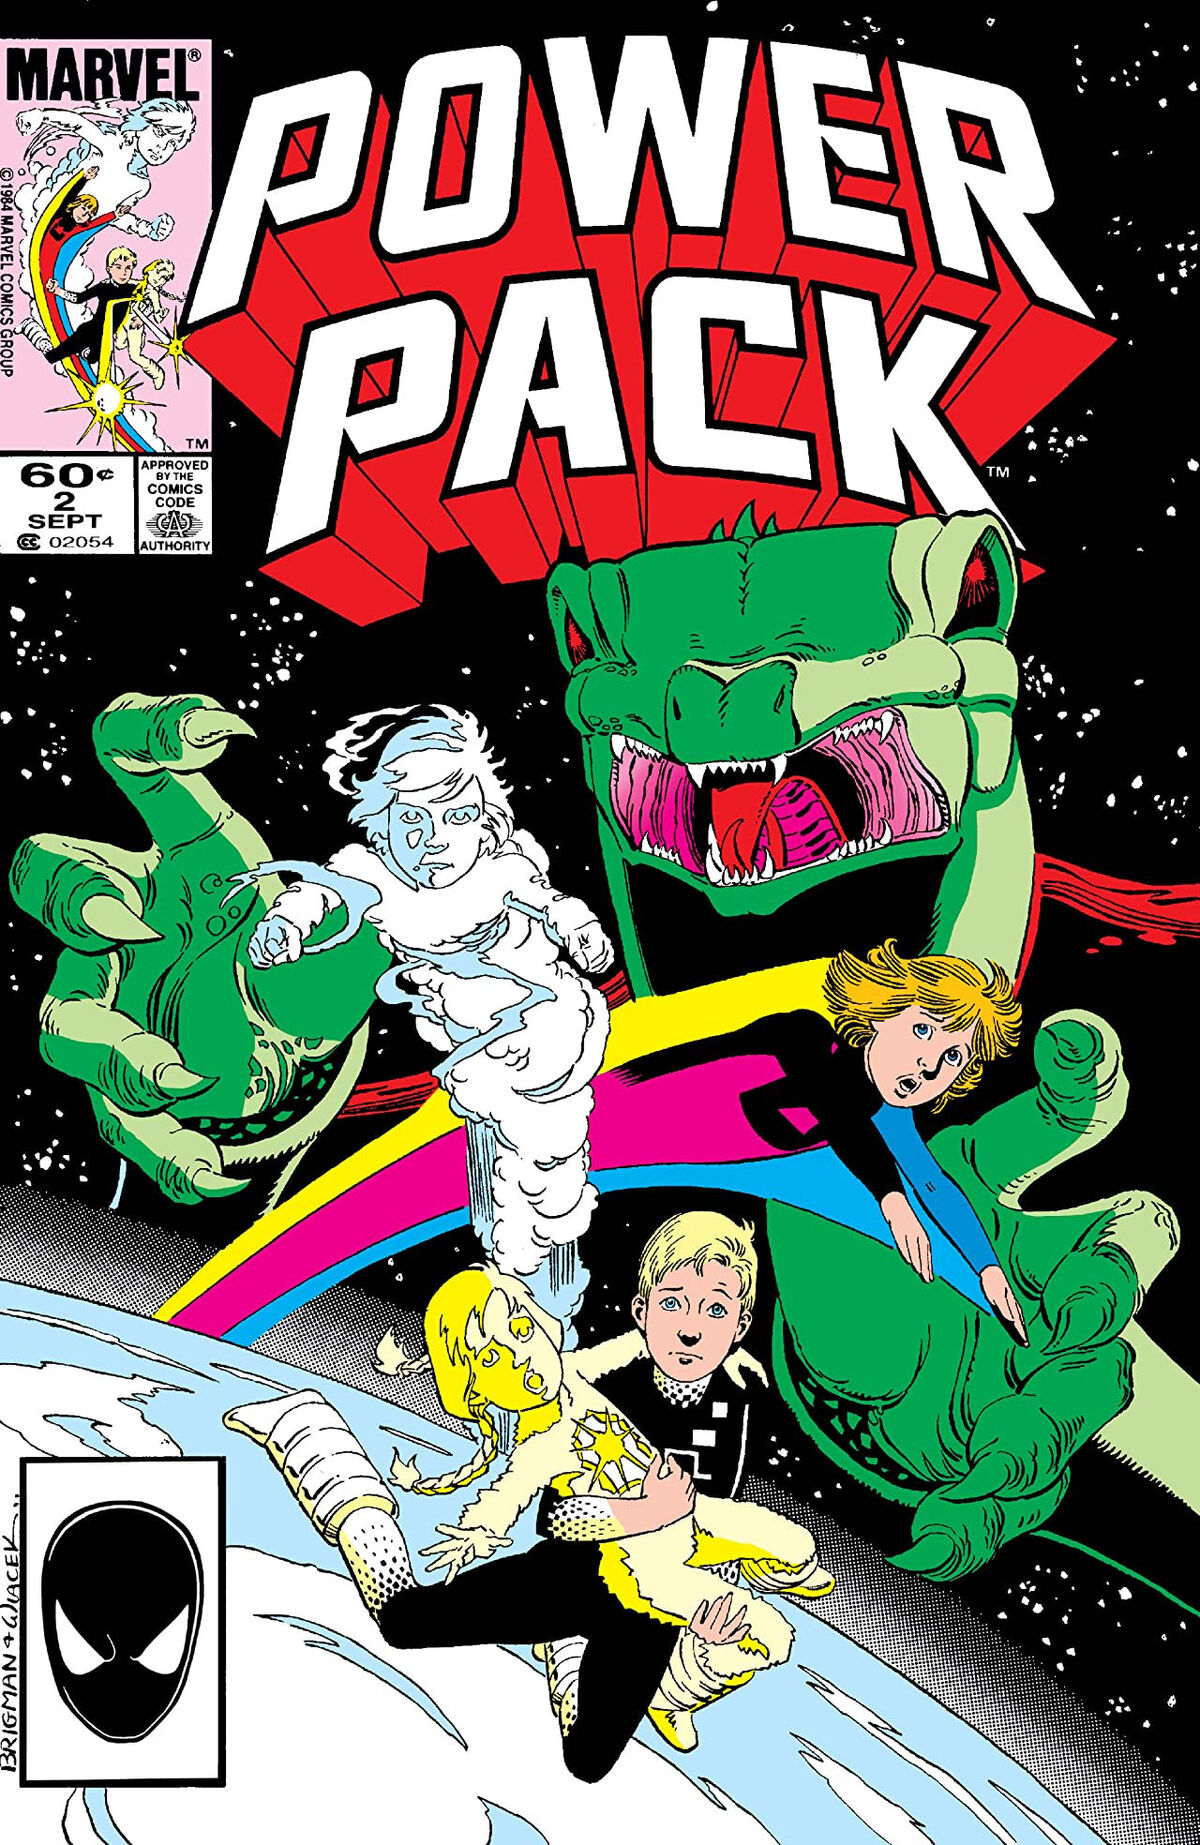 Power pack комикс. A Power Packing комикс. Power Pack Marvel. Пауэр читает.